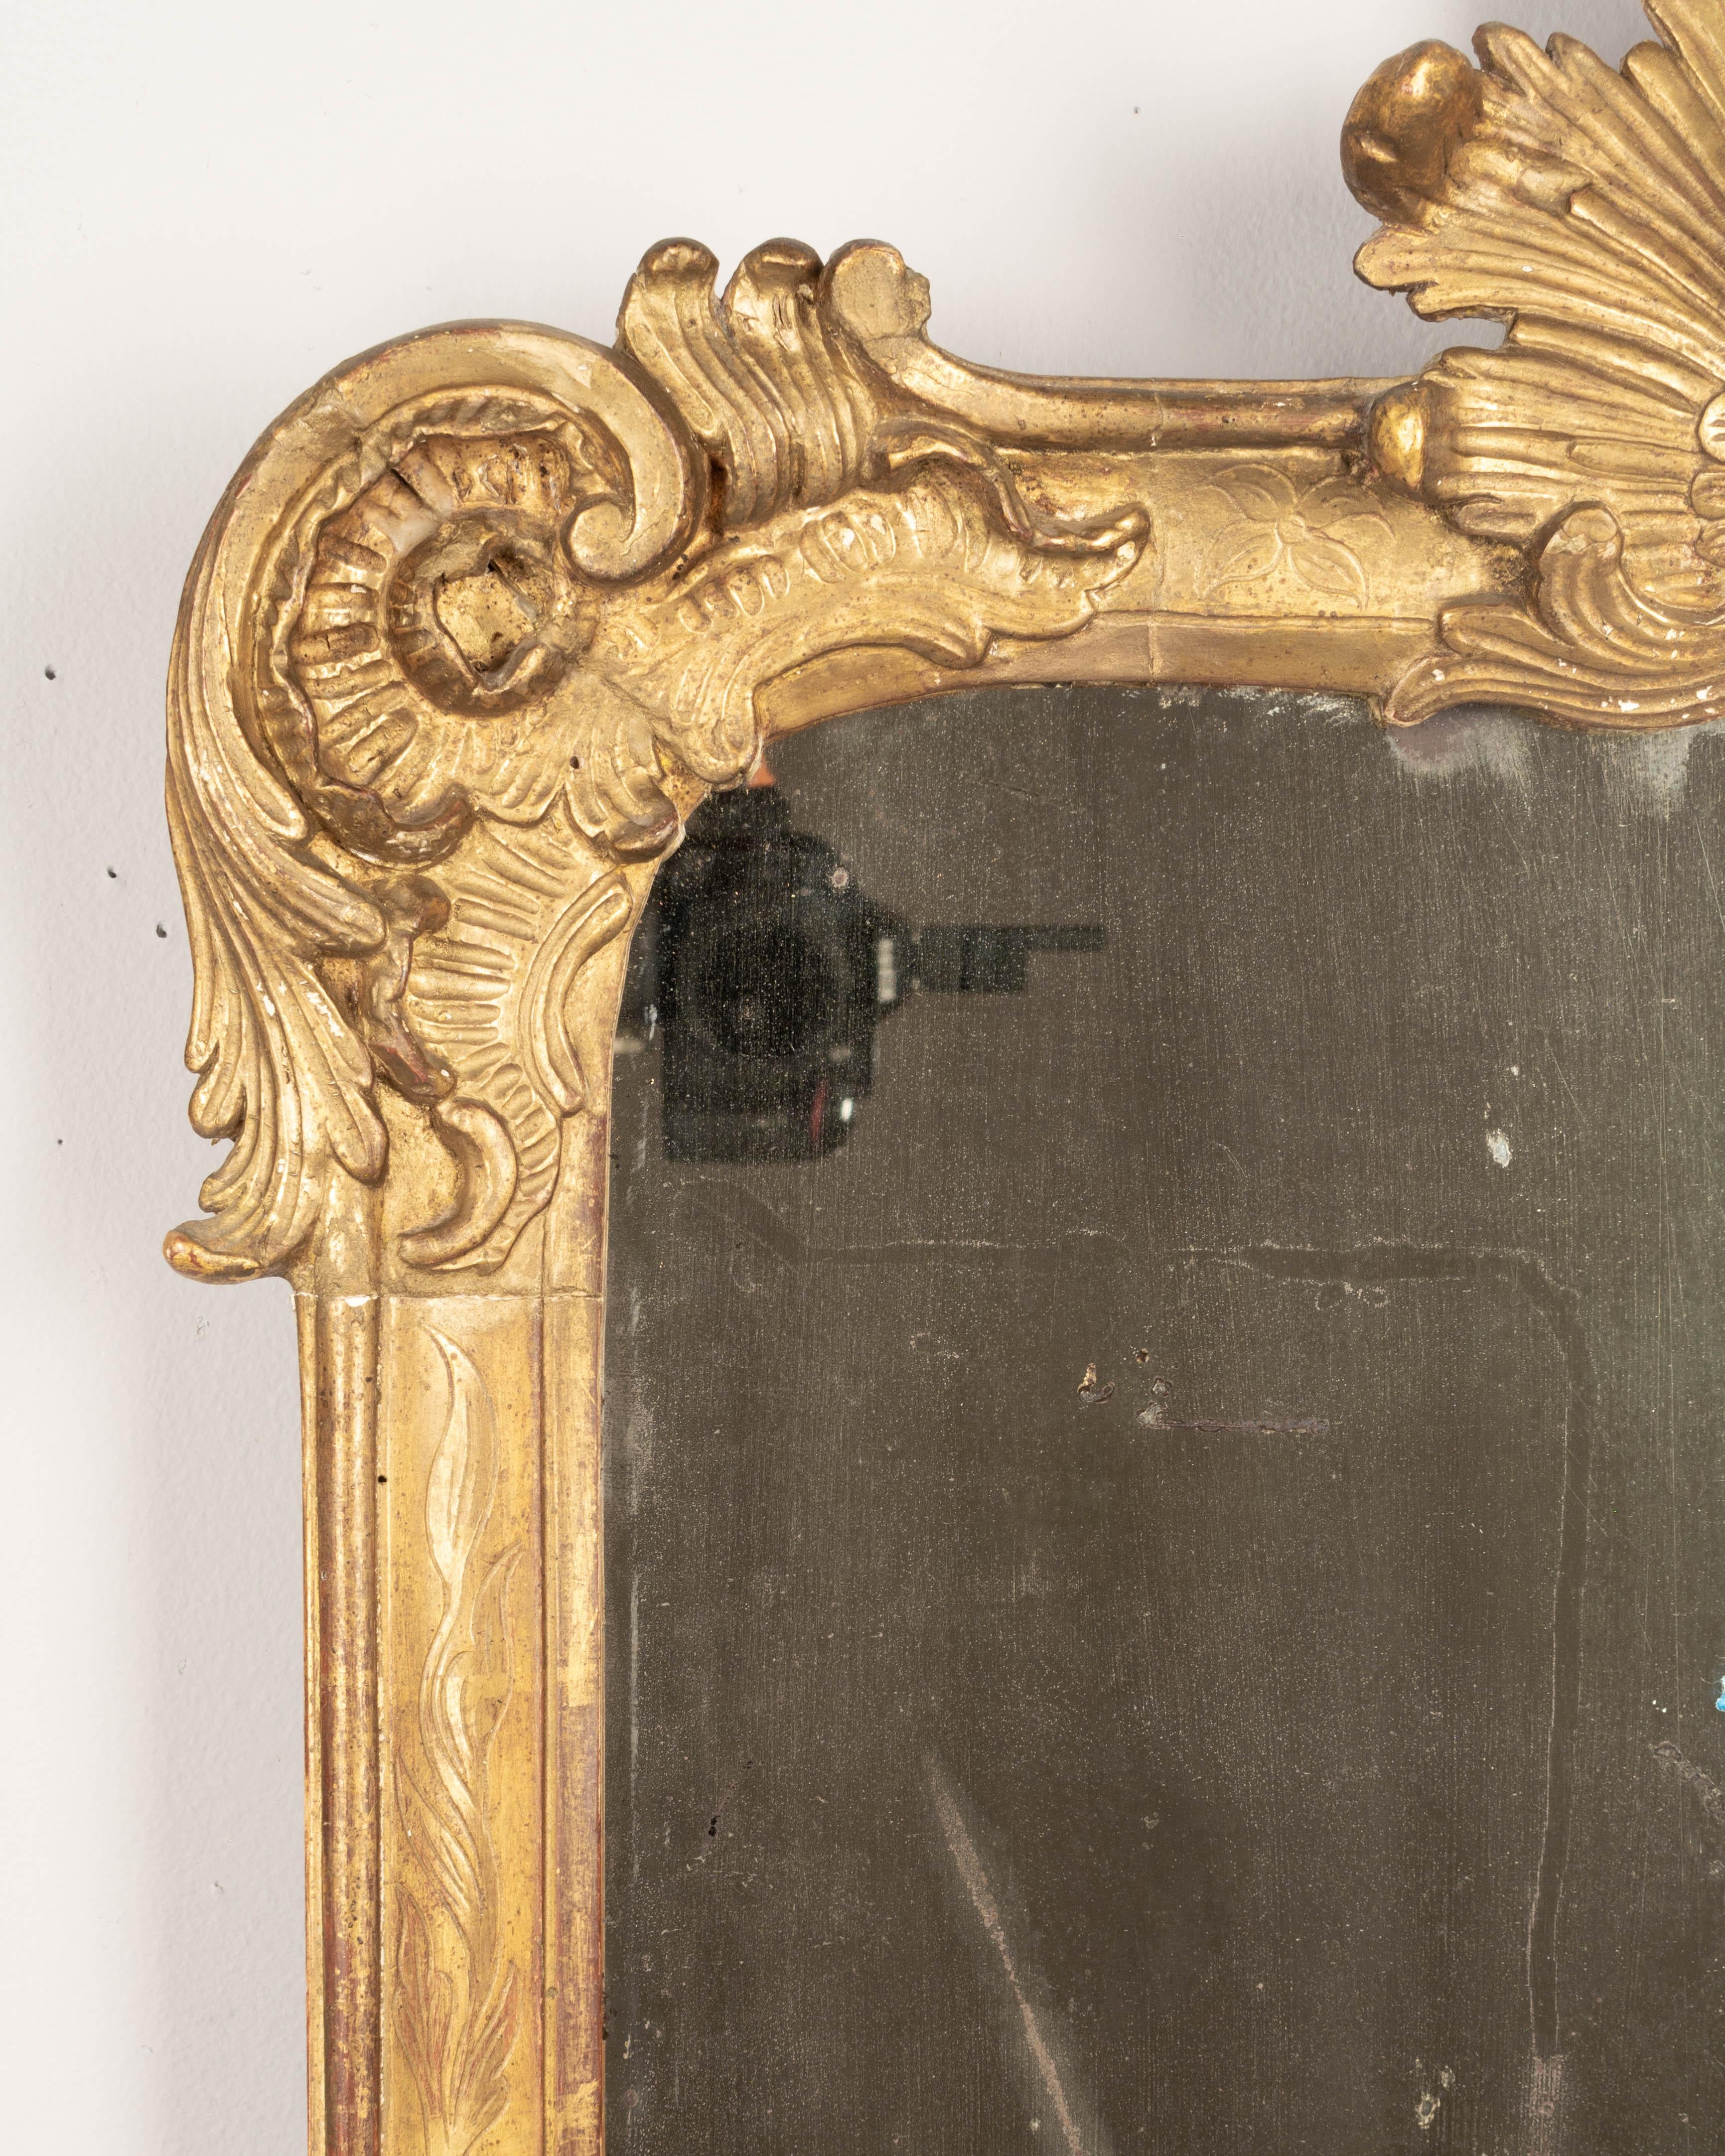 A fine 18th century French Régence Period giltwood mirror with sunburst crest and scroll form curved corner decoration. Nice patina with pale gilt finish. Original mirror with old silvering and light scratches. In excellent condition for its age